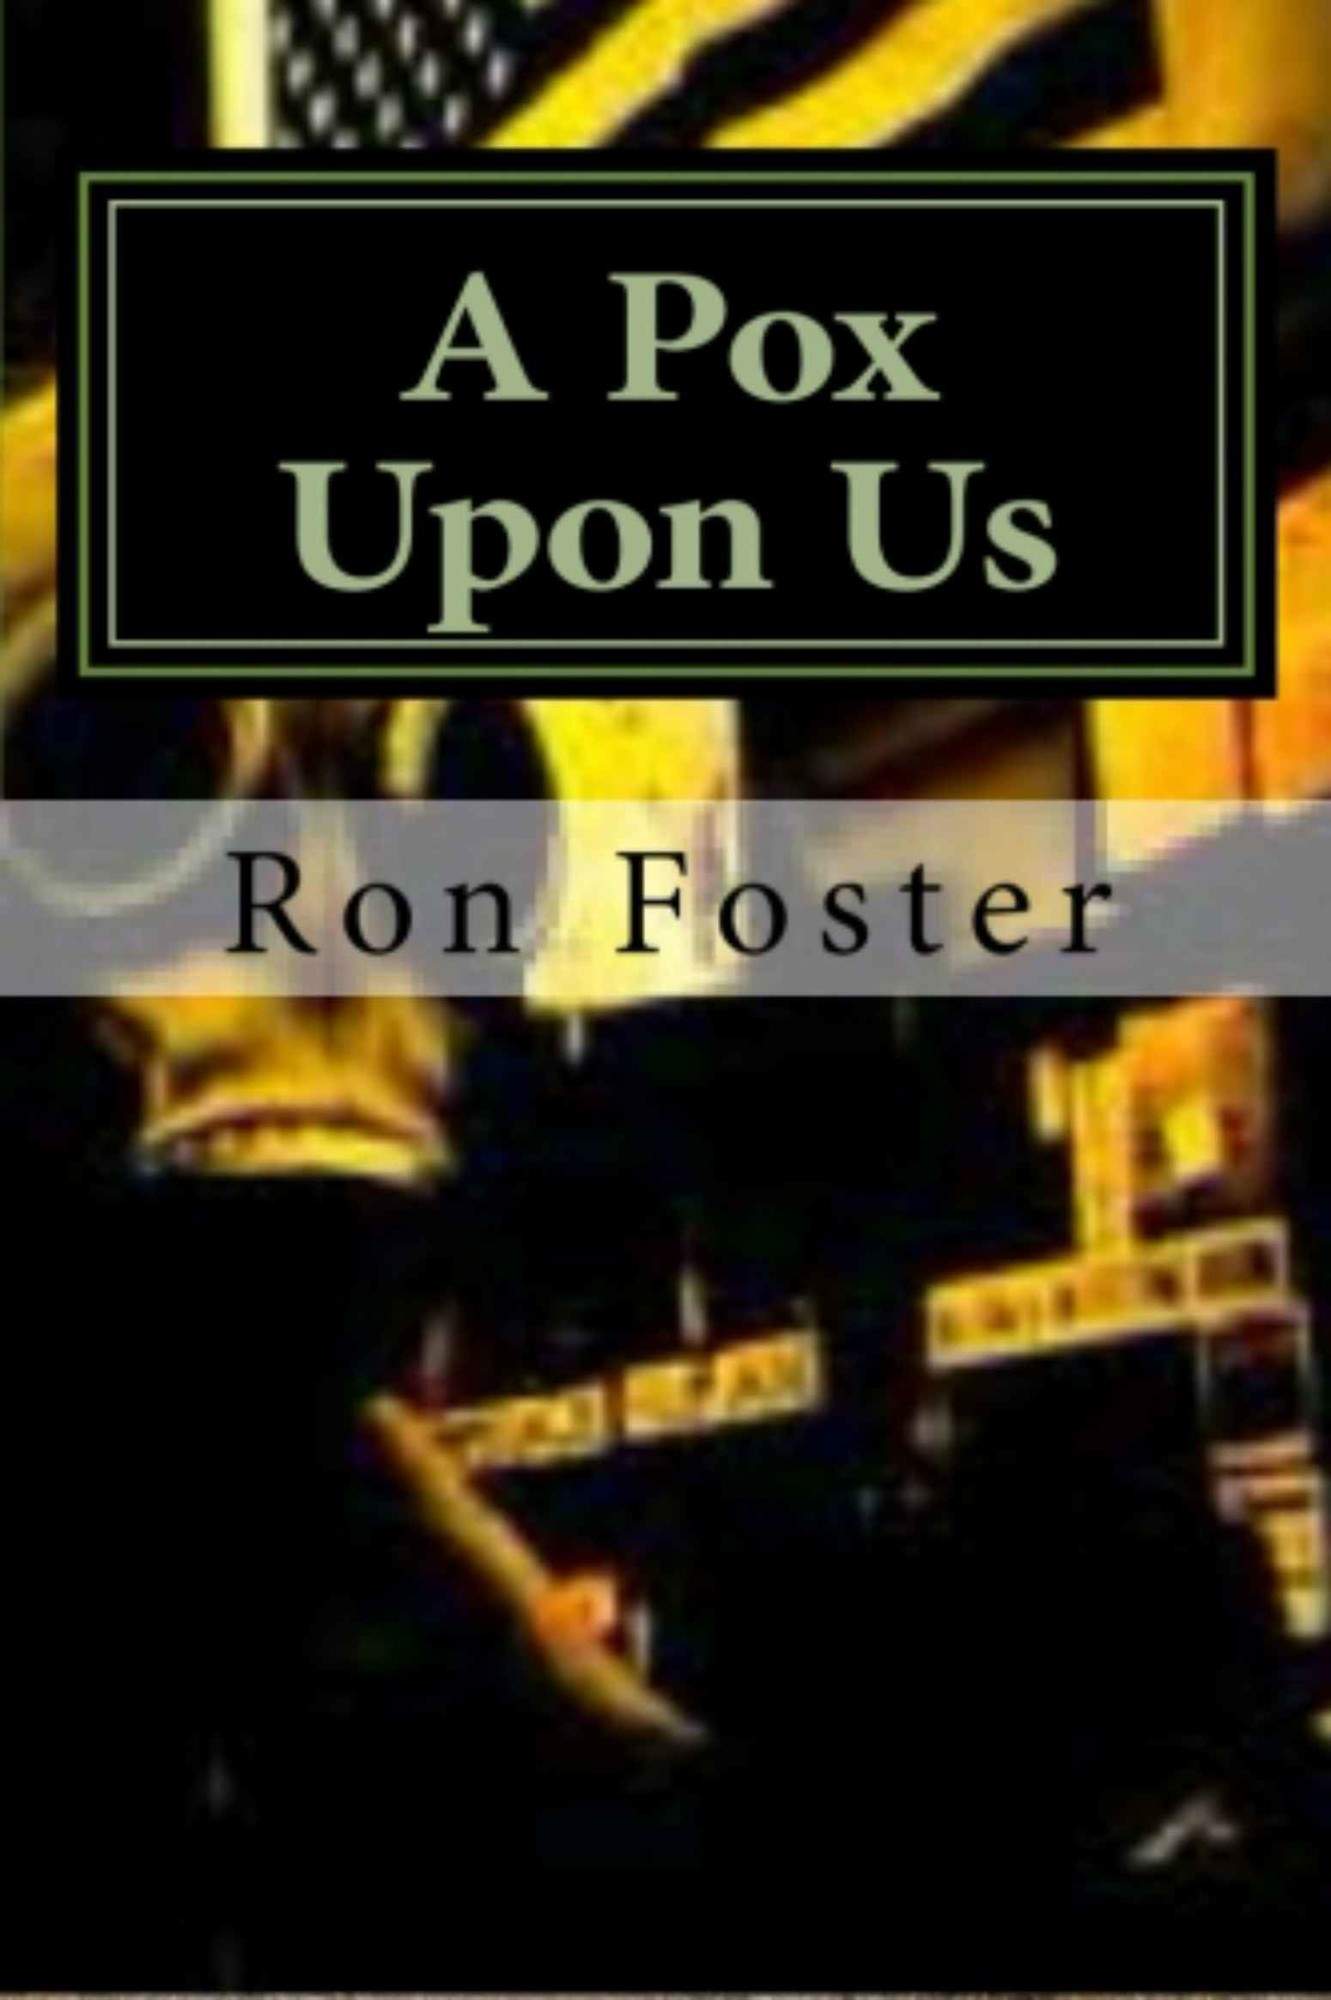 A Pox Upon Us by Ron Foster